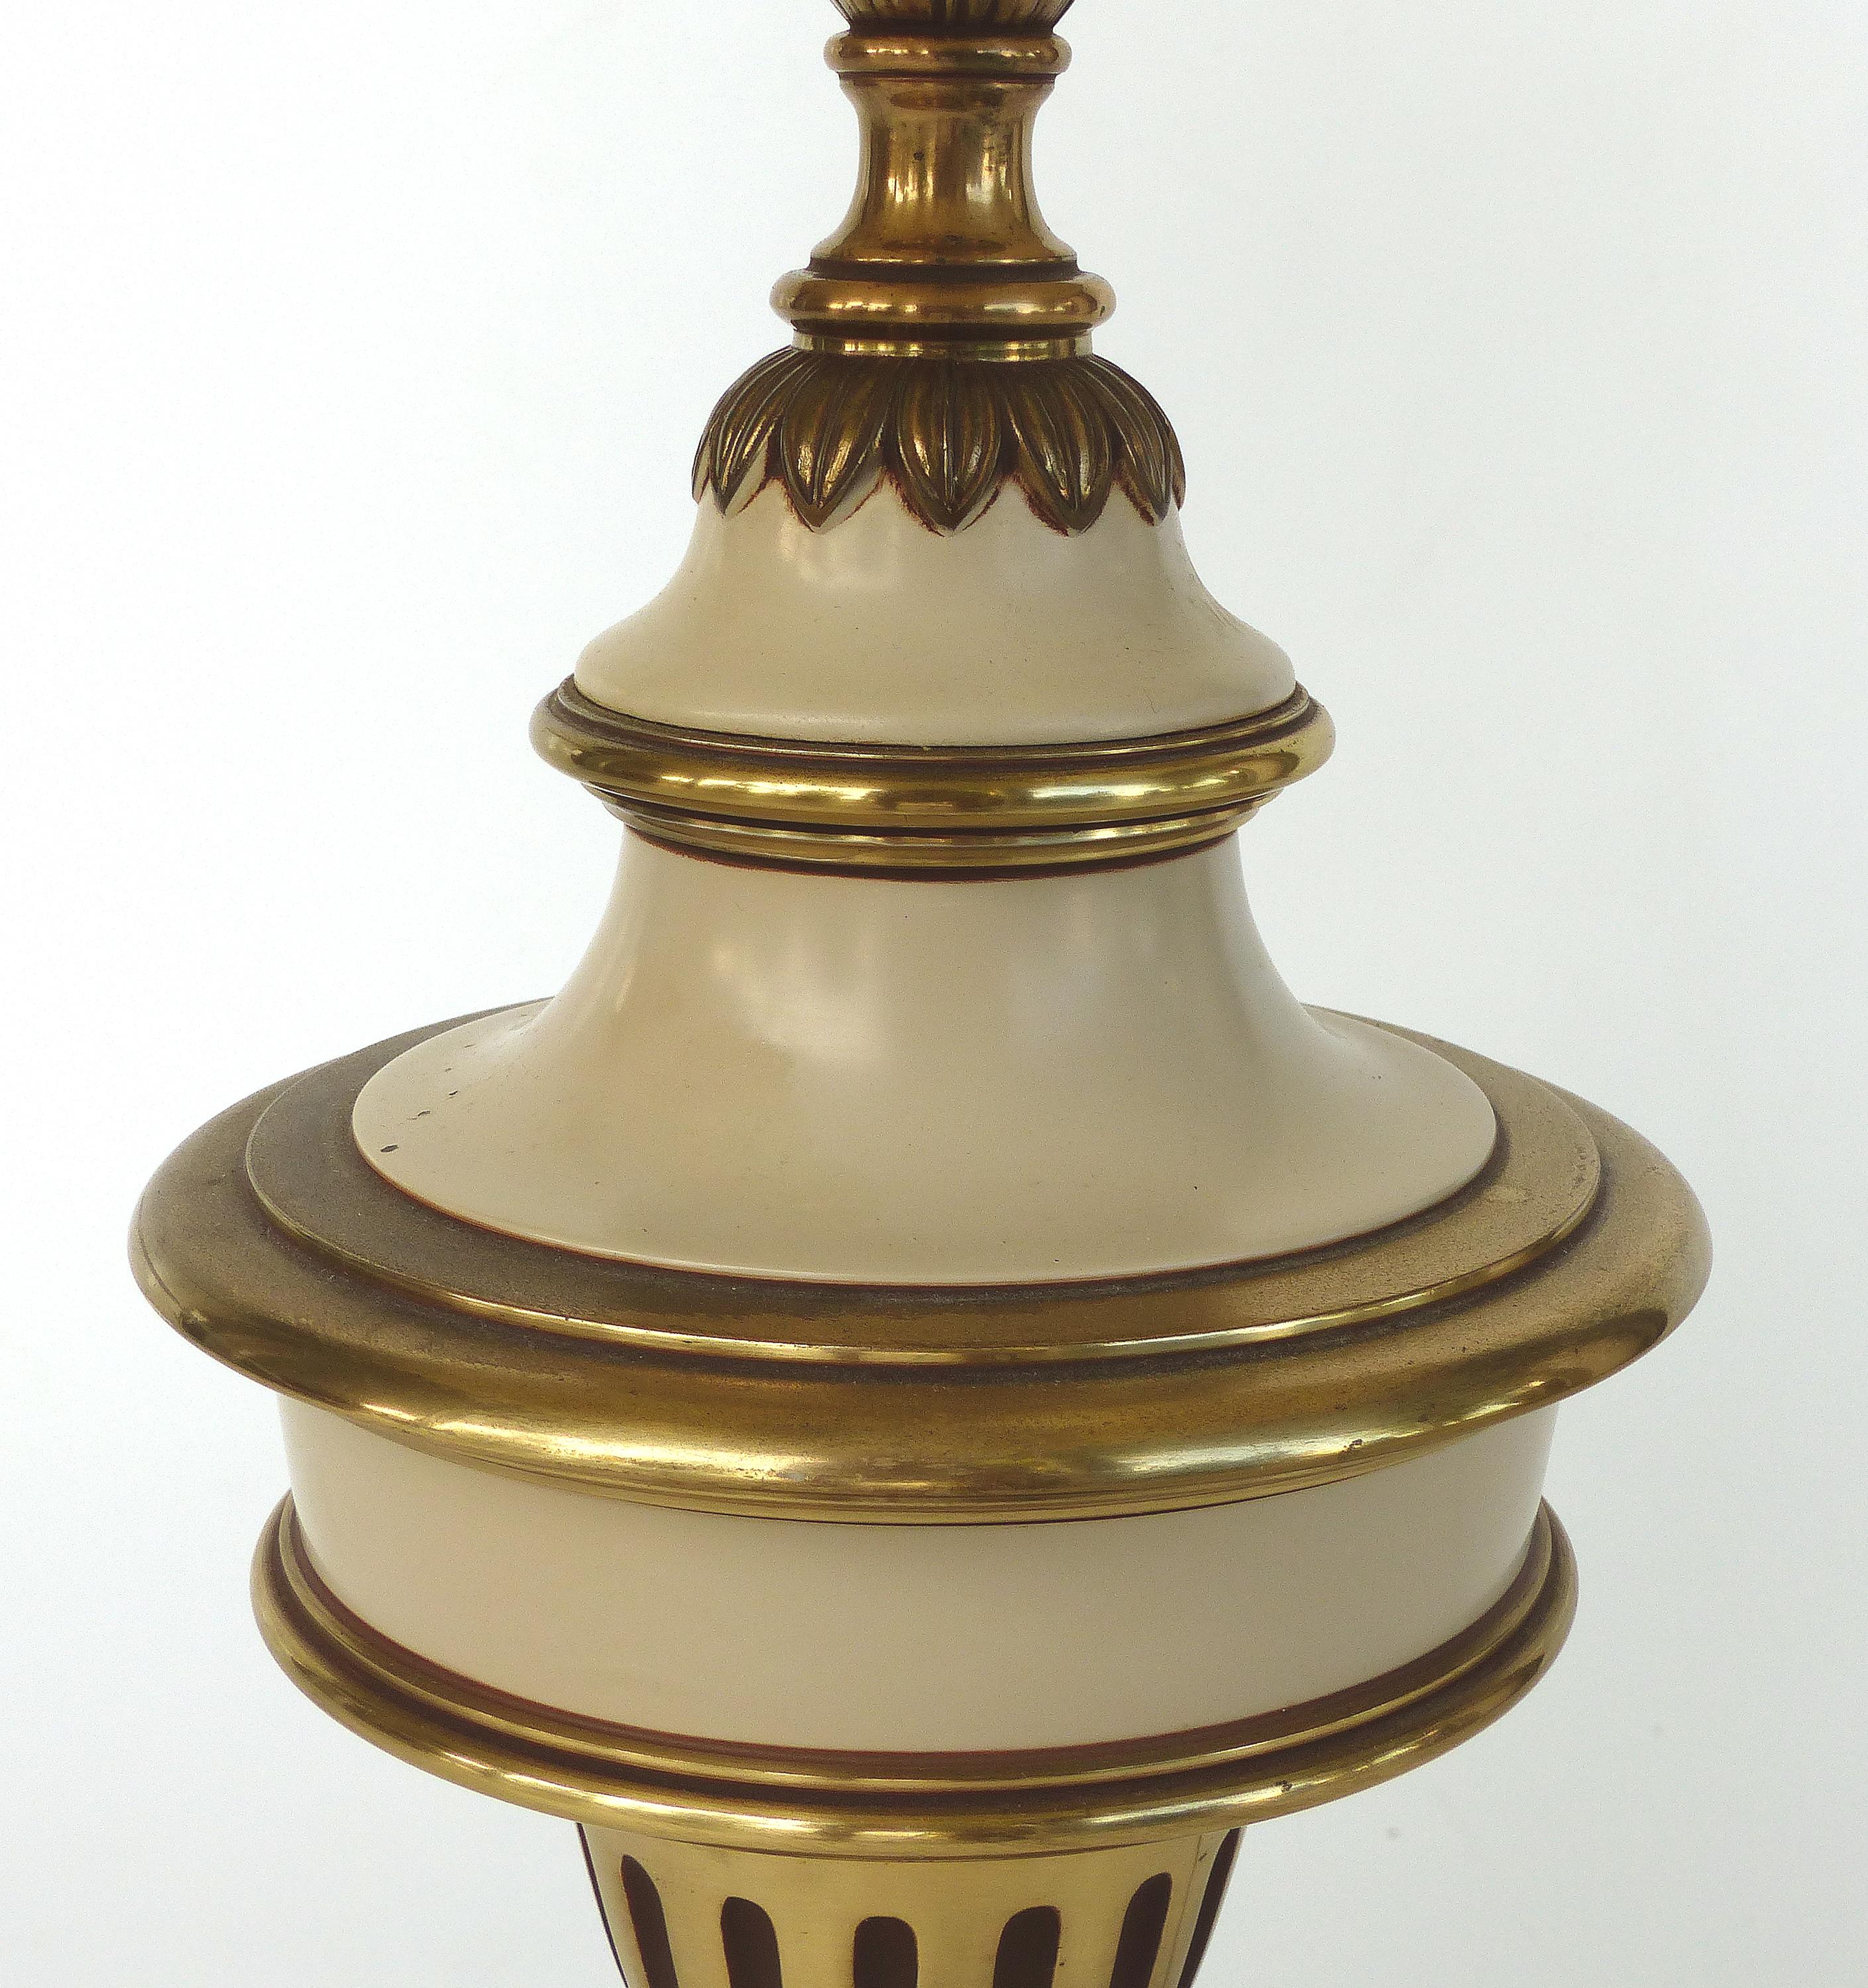 Brass Stiffel Table Lamps, Pair

Offered for sale is a pair of brass and painted brass table lamps from Stiffel. The lamps have switches on the classic style plinth bases, and have the shades that came with them but they are not marked. The top of